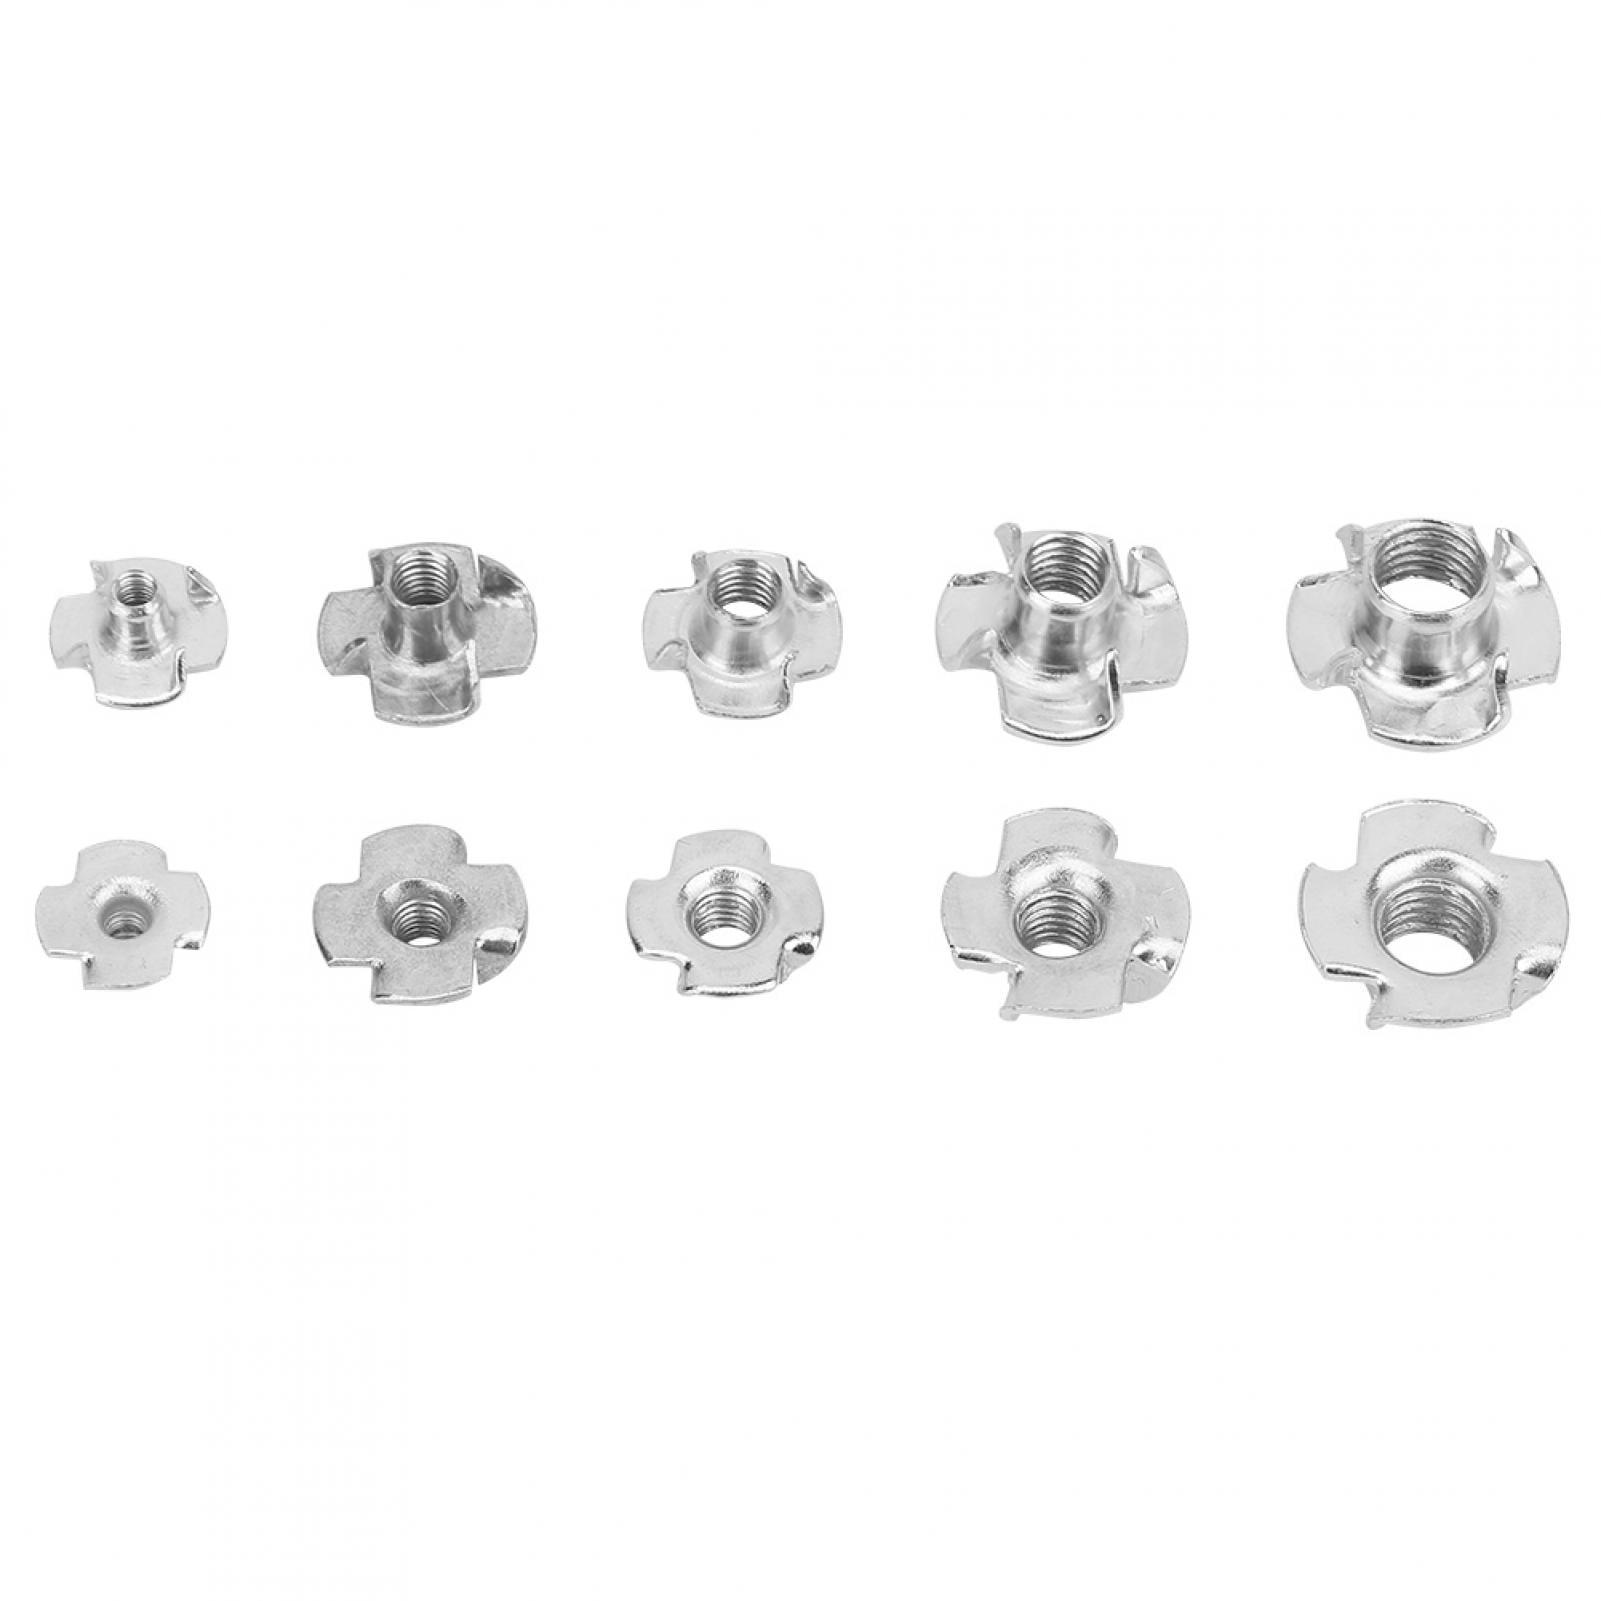 Four-Pronged T Nut Set 80pcs Carbon Steel T Nut Four-Pronged M3/4/5/6/8 Tee Nuts 